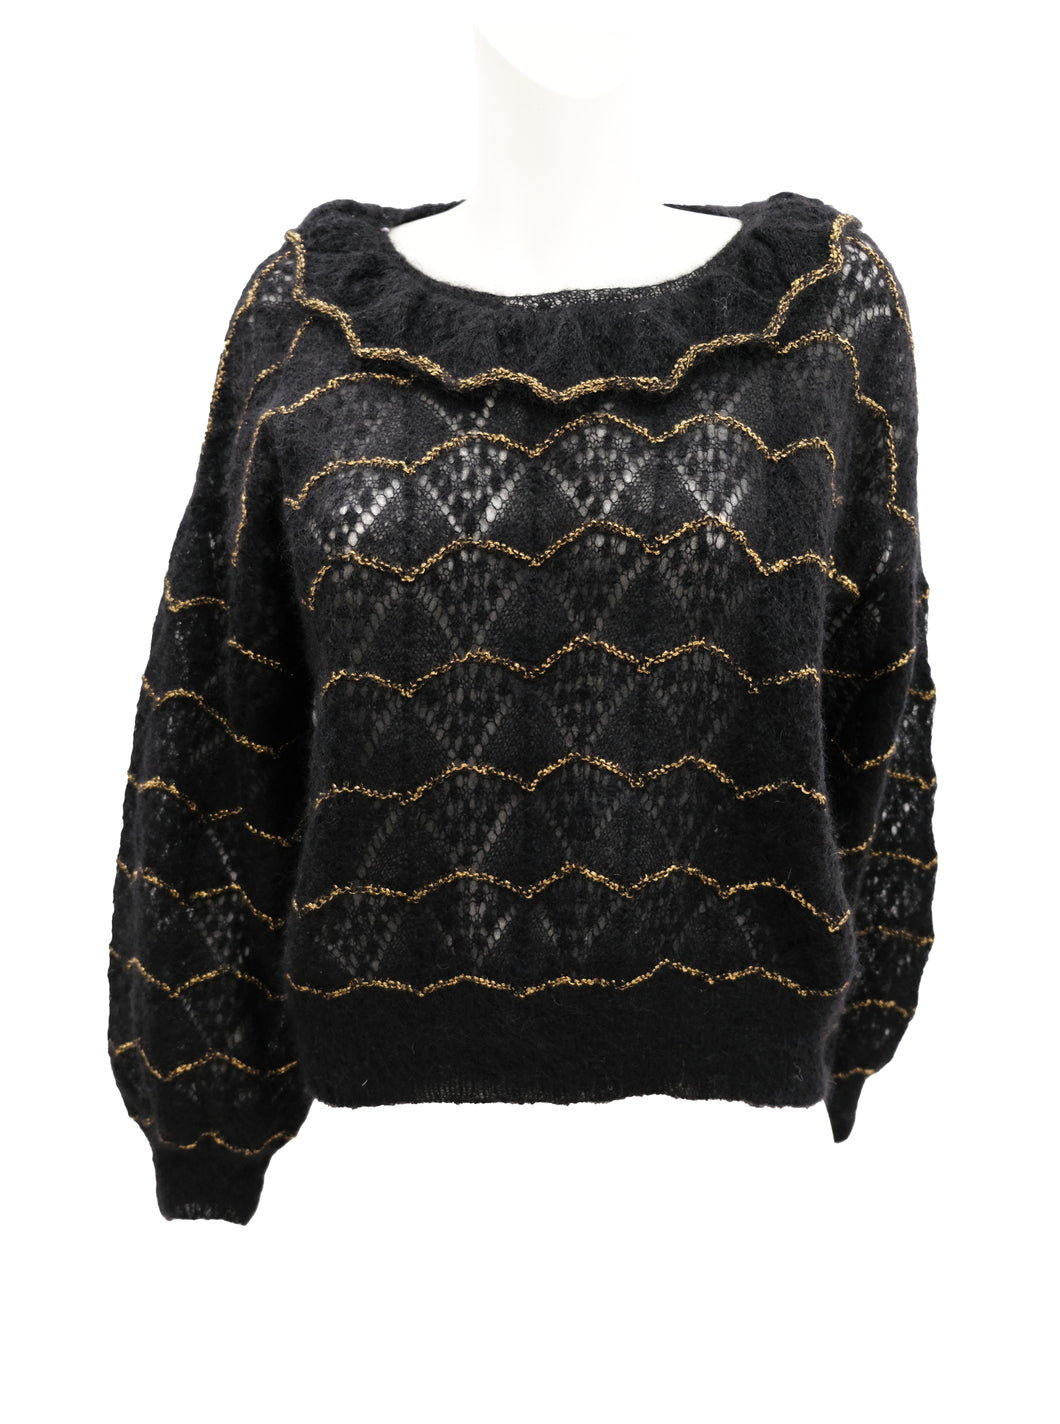 Vintage Hand Knitted Lacy Black Jumper with Gold Stripe, UK10